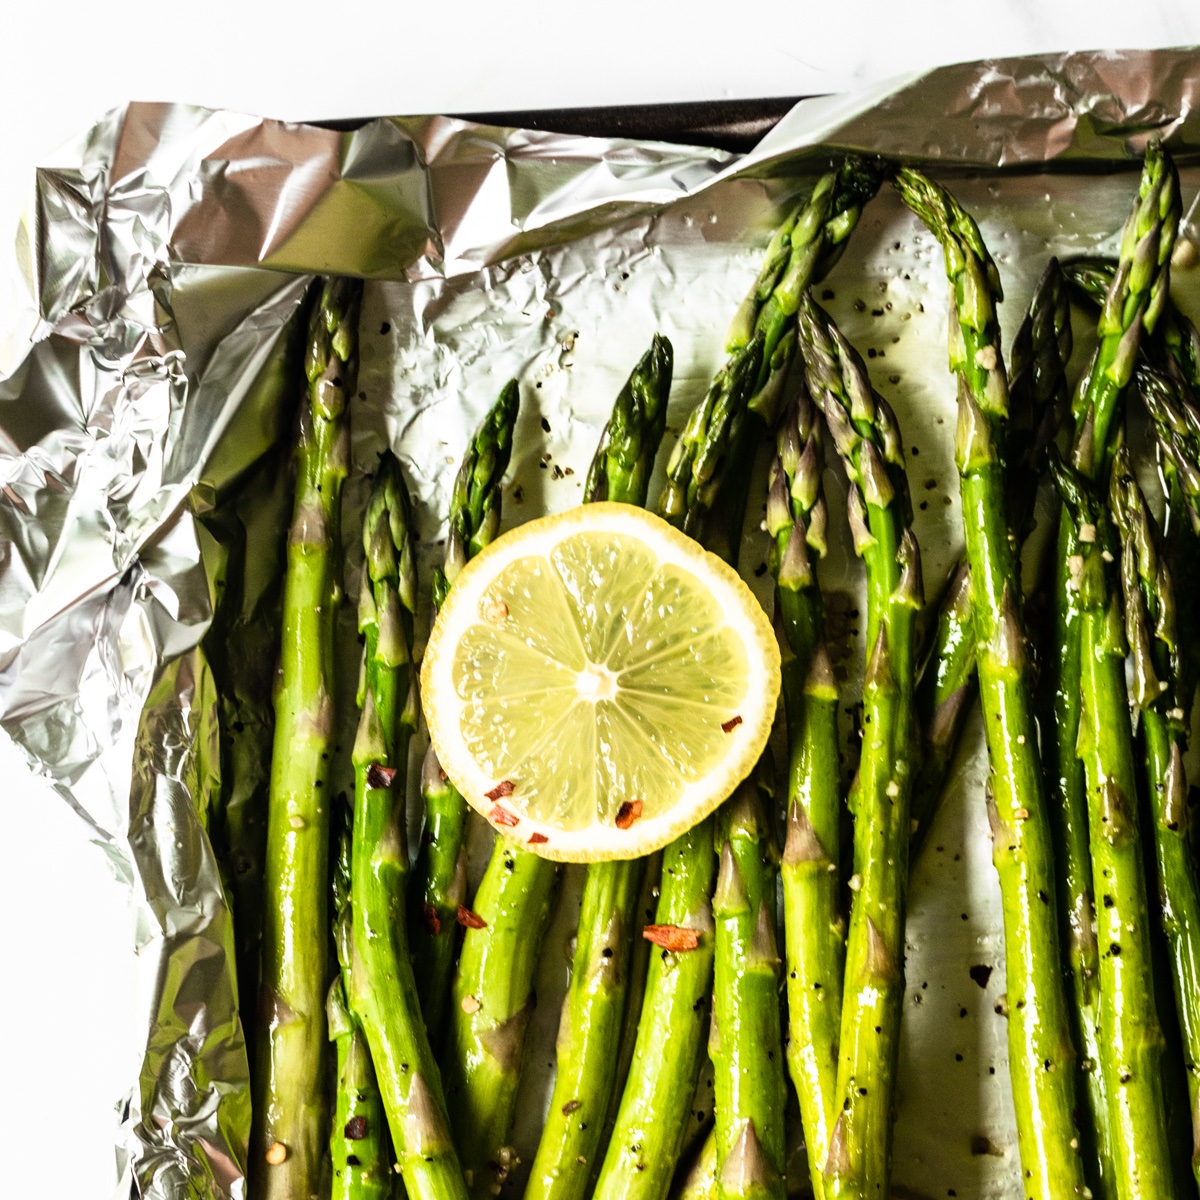 This roasted asparagus recipe is seasoned with olive oil, fresh garlic, salt, and pepper, and finished with freshly squeezed lemon juice. It's a simple side dish that everyone will love and on the table in just 20 minutes!